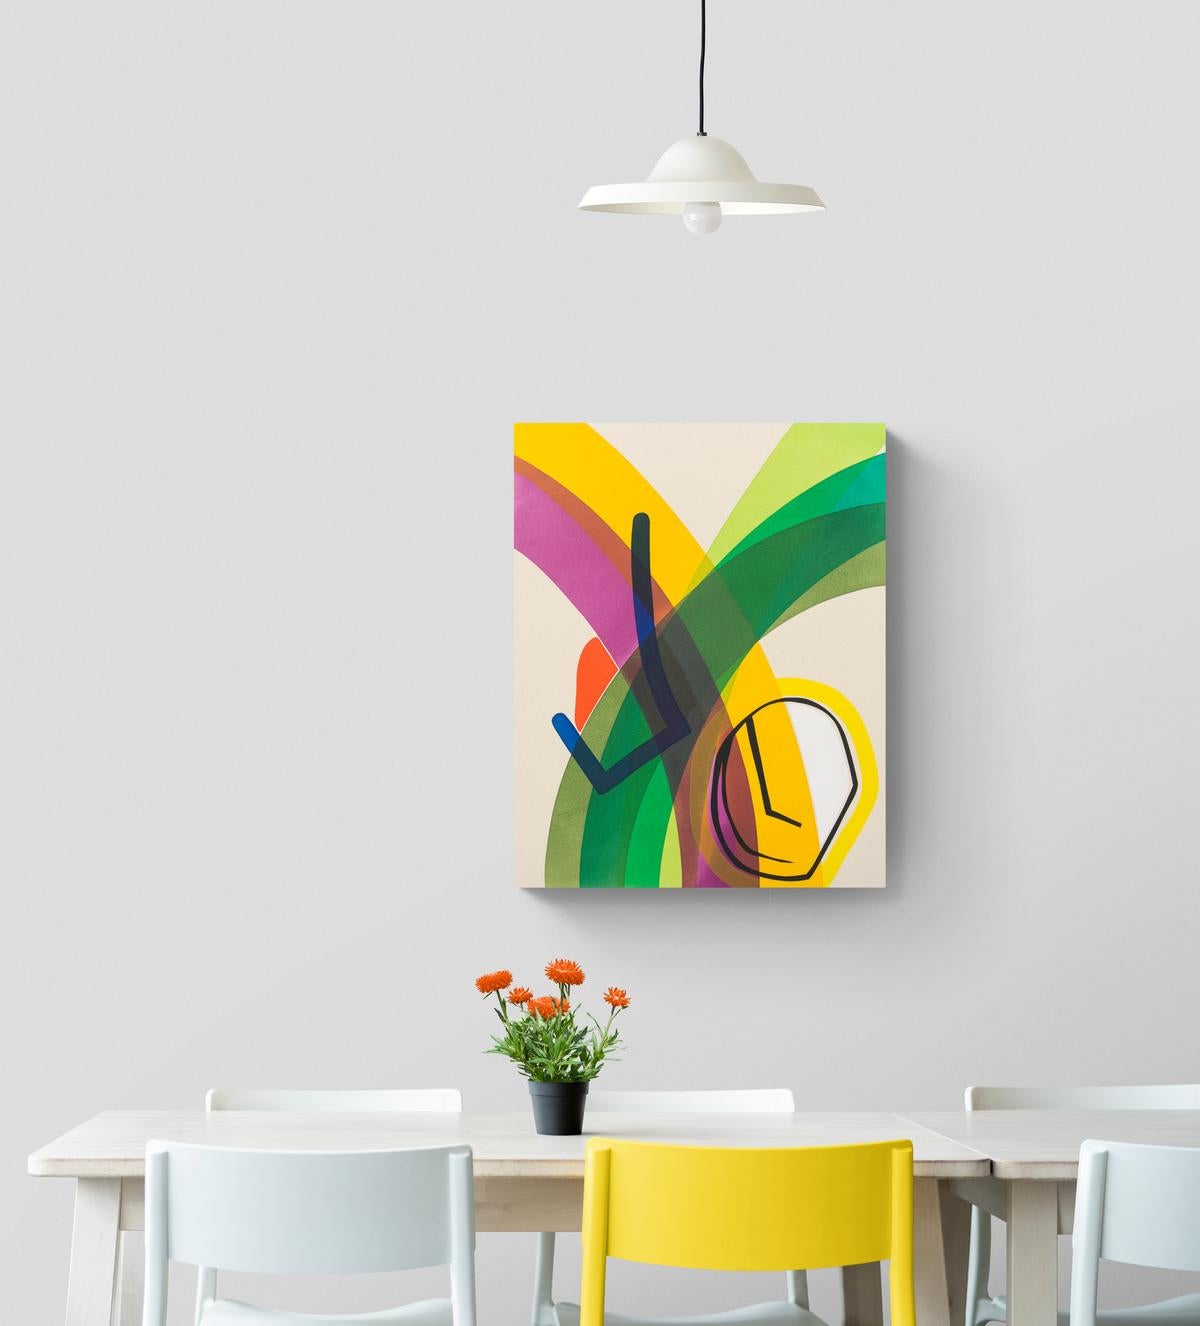 Head With Blue Line No 1 - colorful, intersecting abstract shapes on canvas - Orange Abstract Painting by Aron Hill